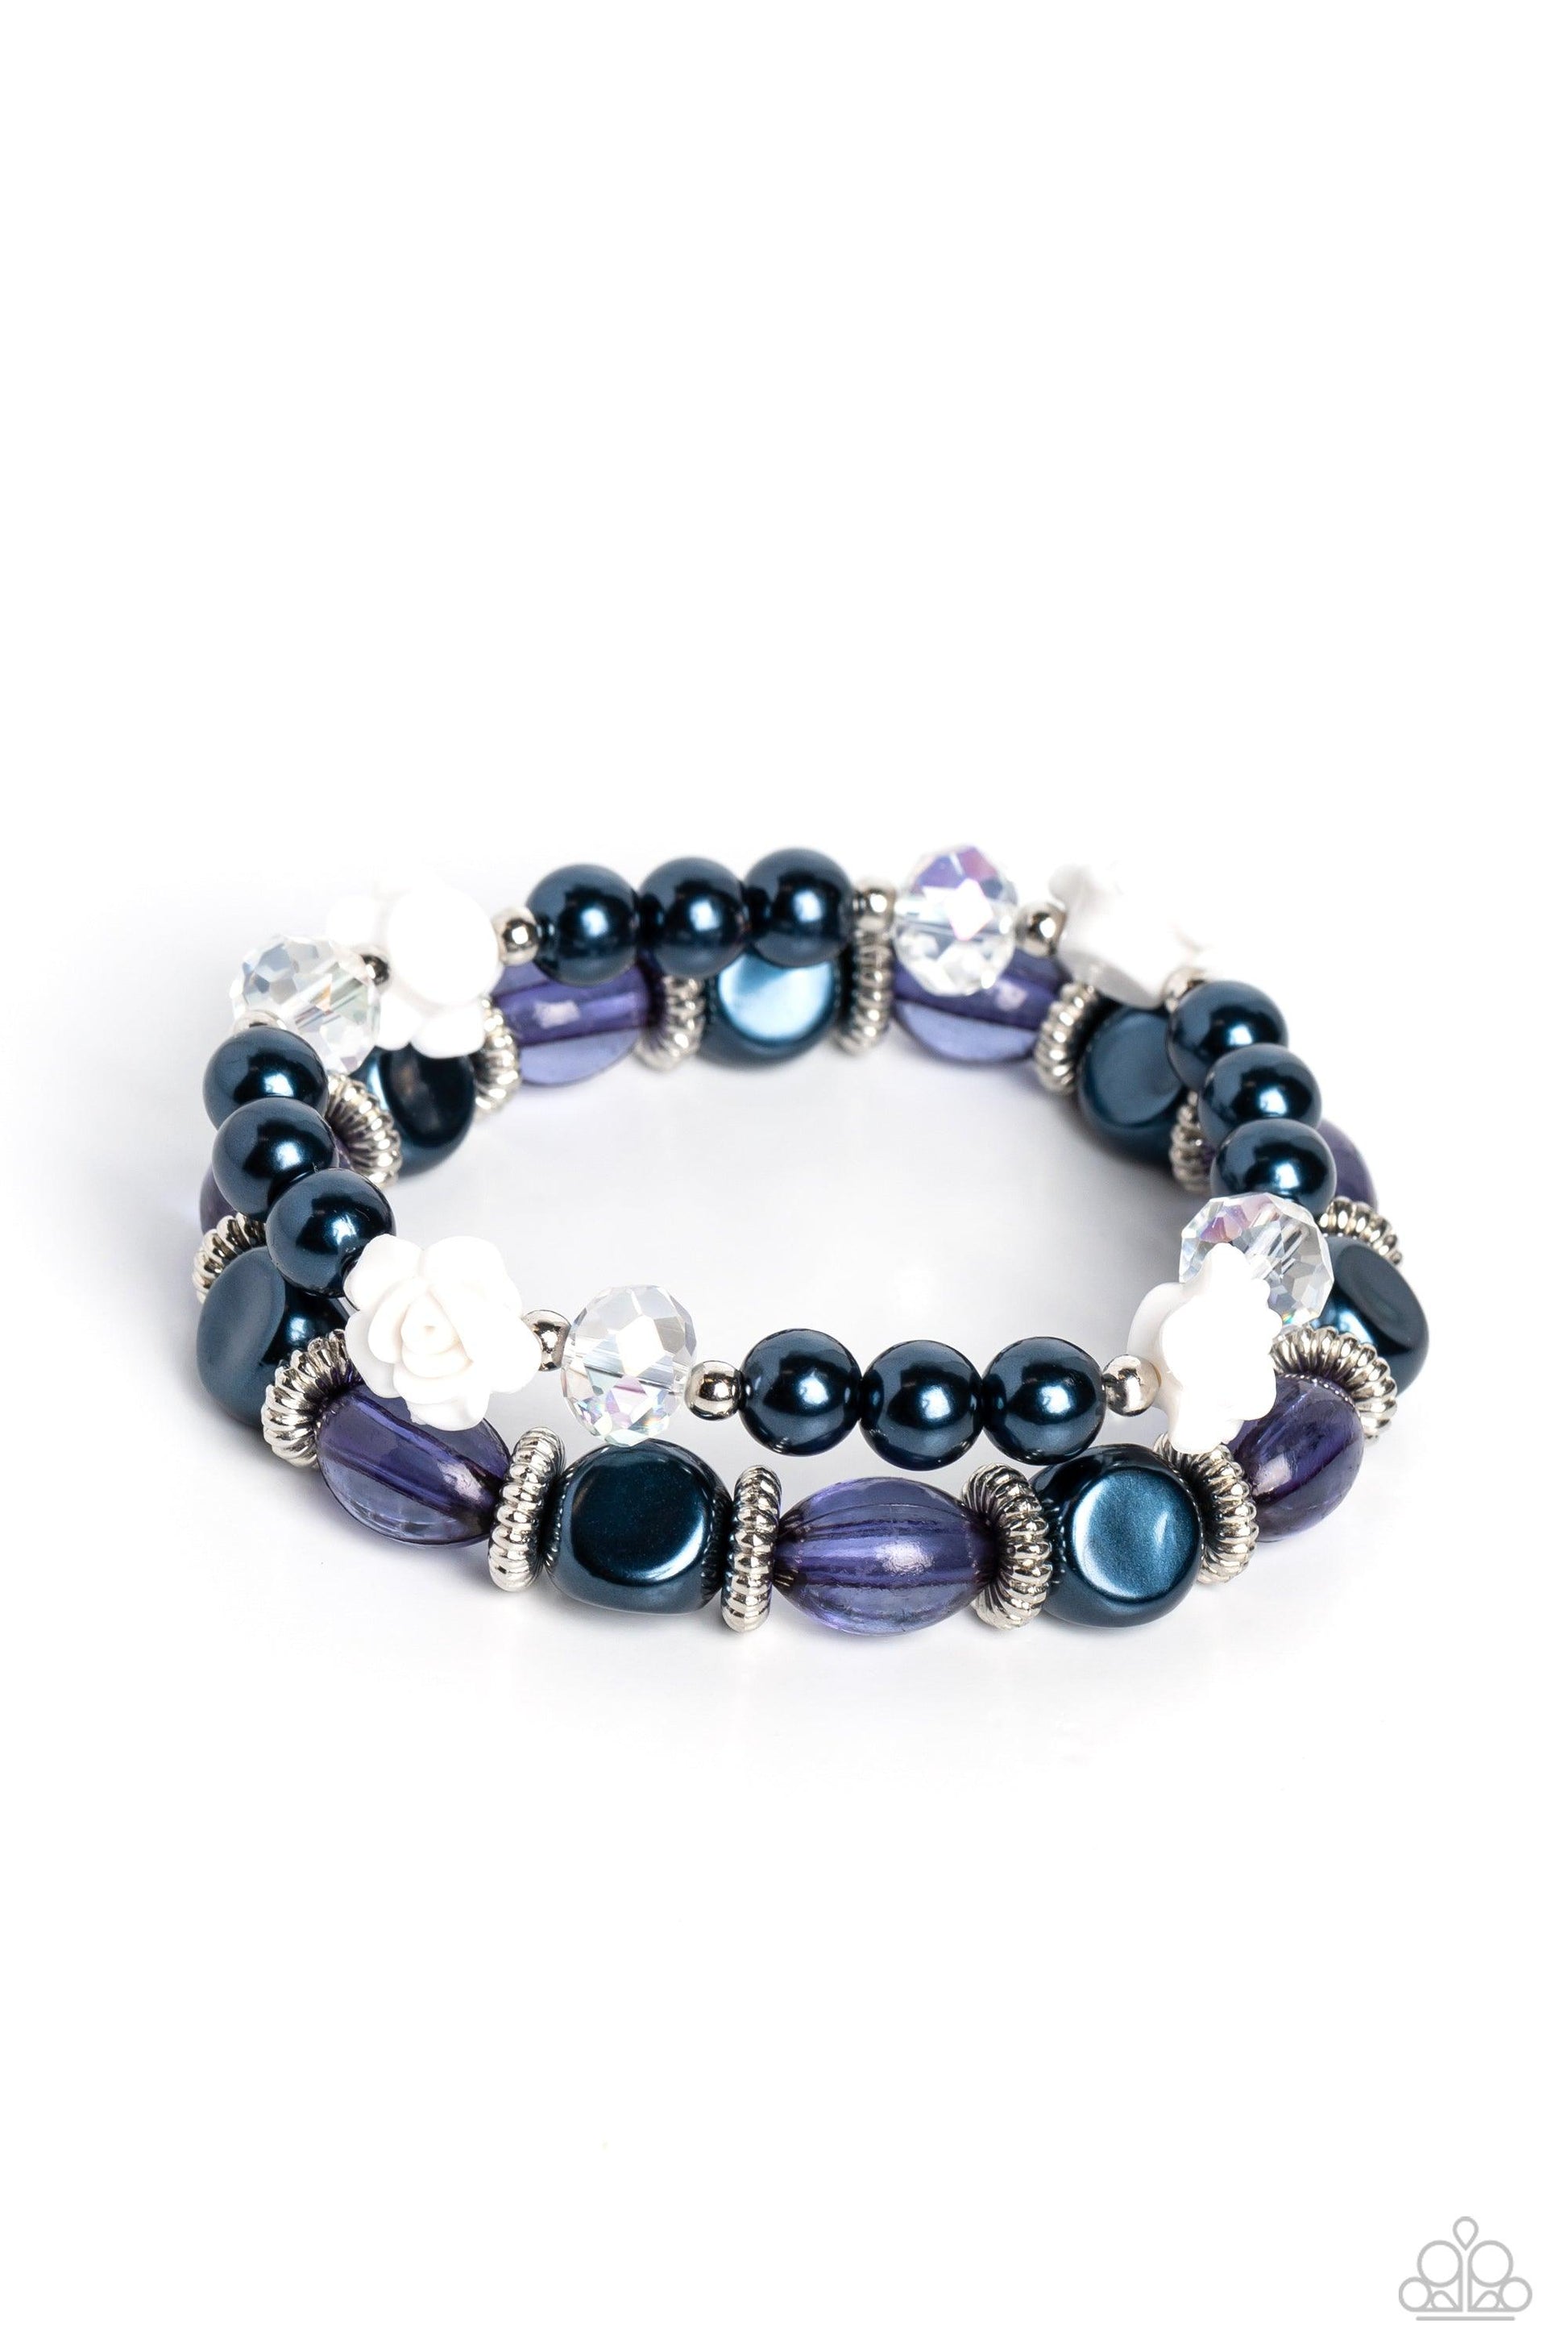 Paparazzi Accessories - Who ROSE There? - Blue Bracelet - Bling by JessieK